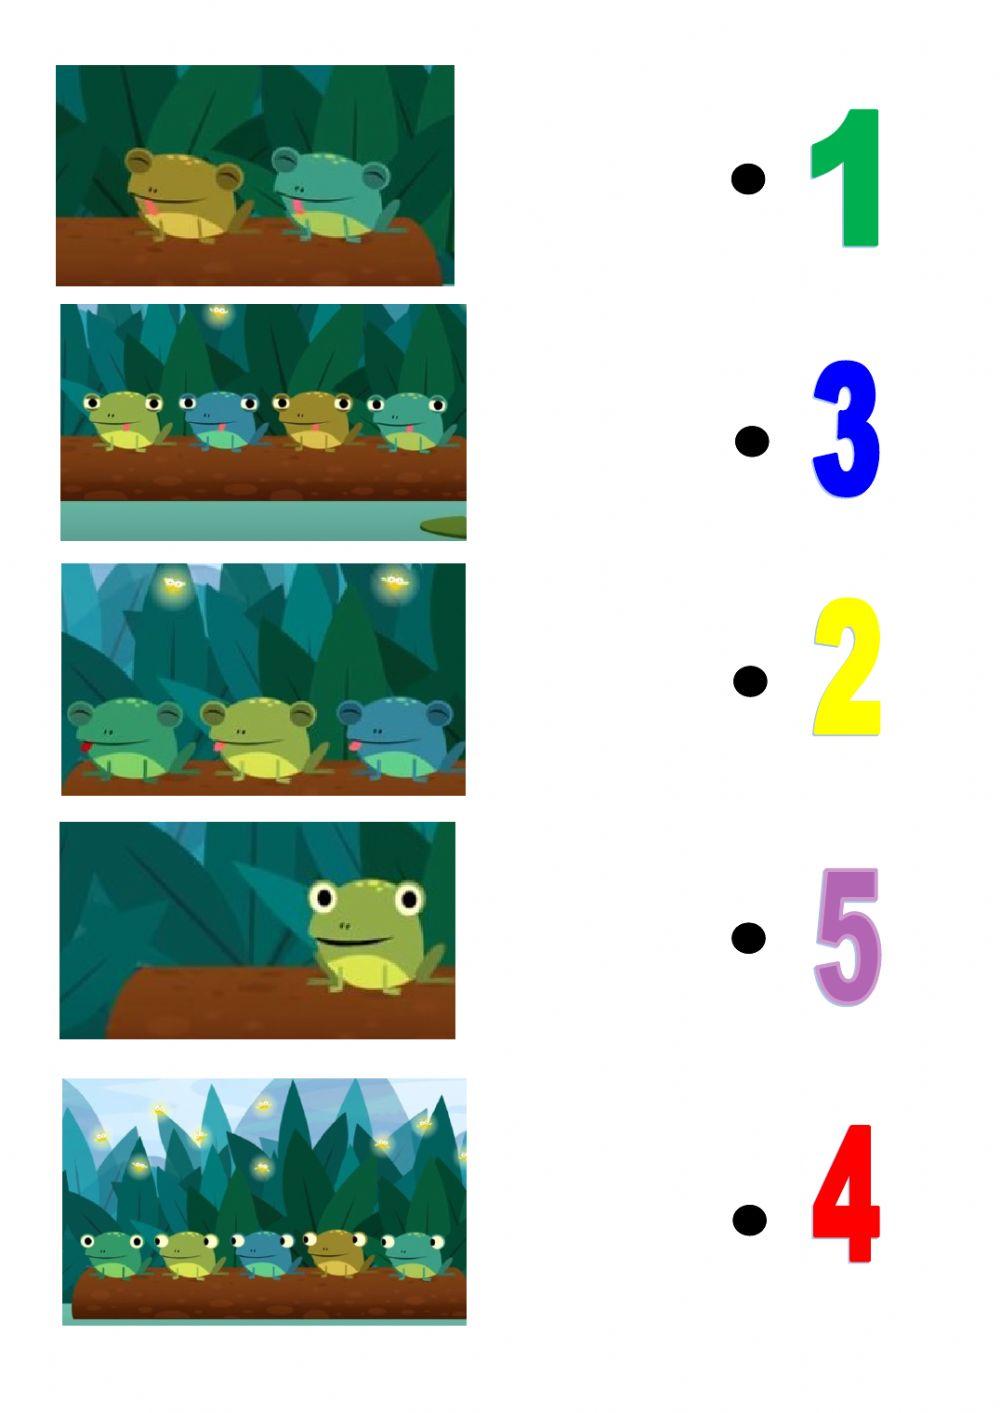 How many frogs